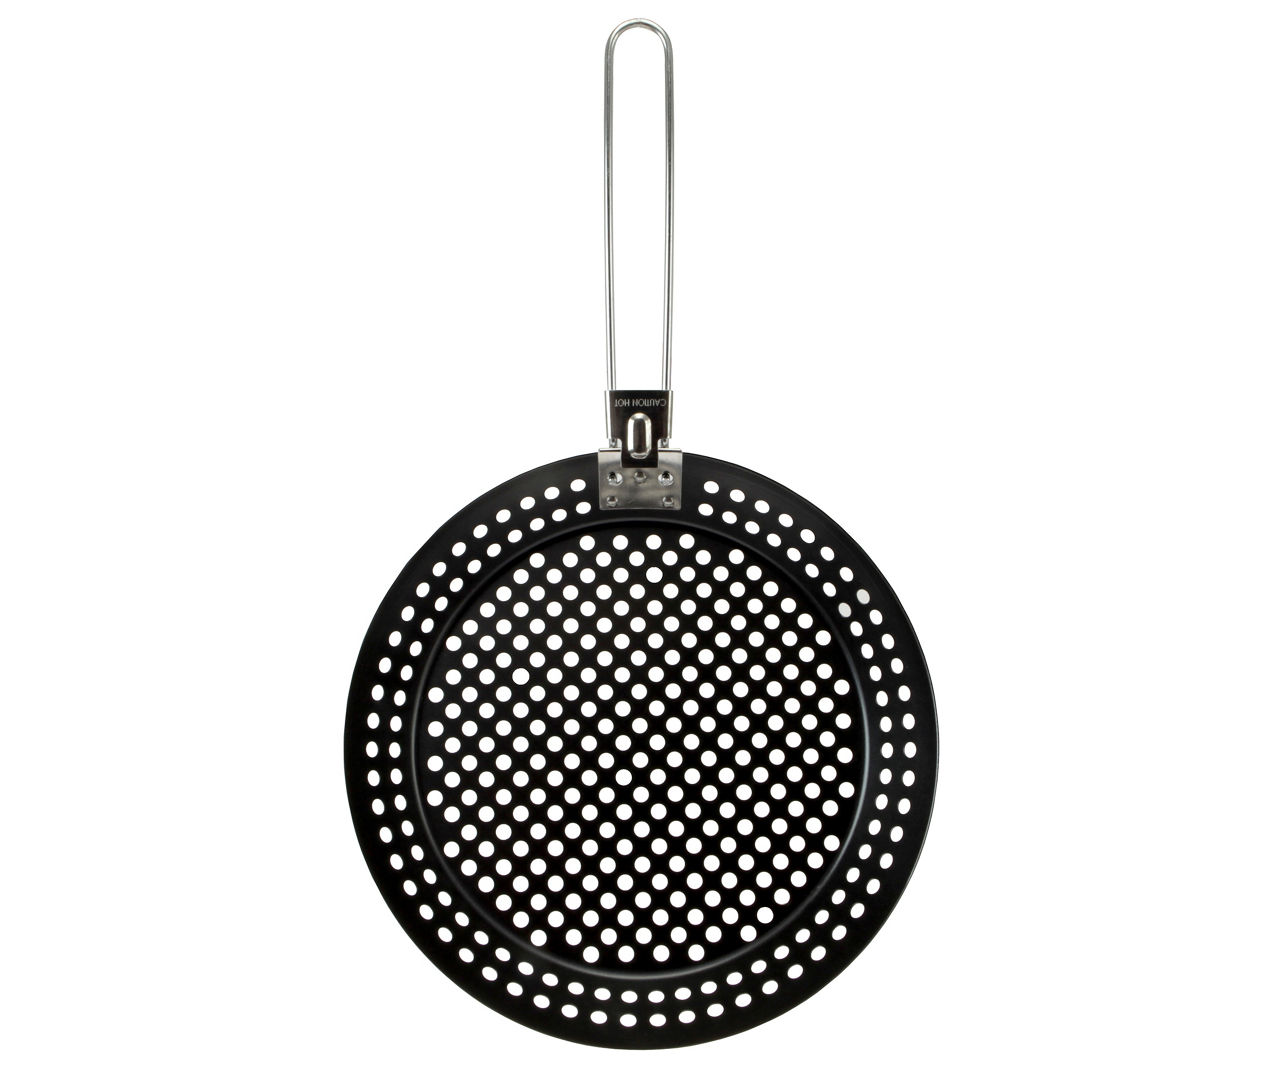 GRILL-EZ Grill Pan - 2-Part Cast Iron Grill Pan with Removable